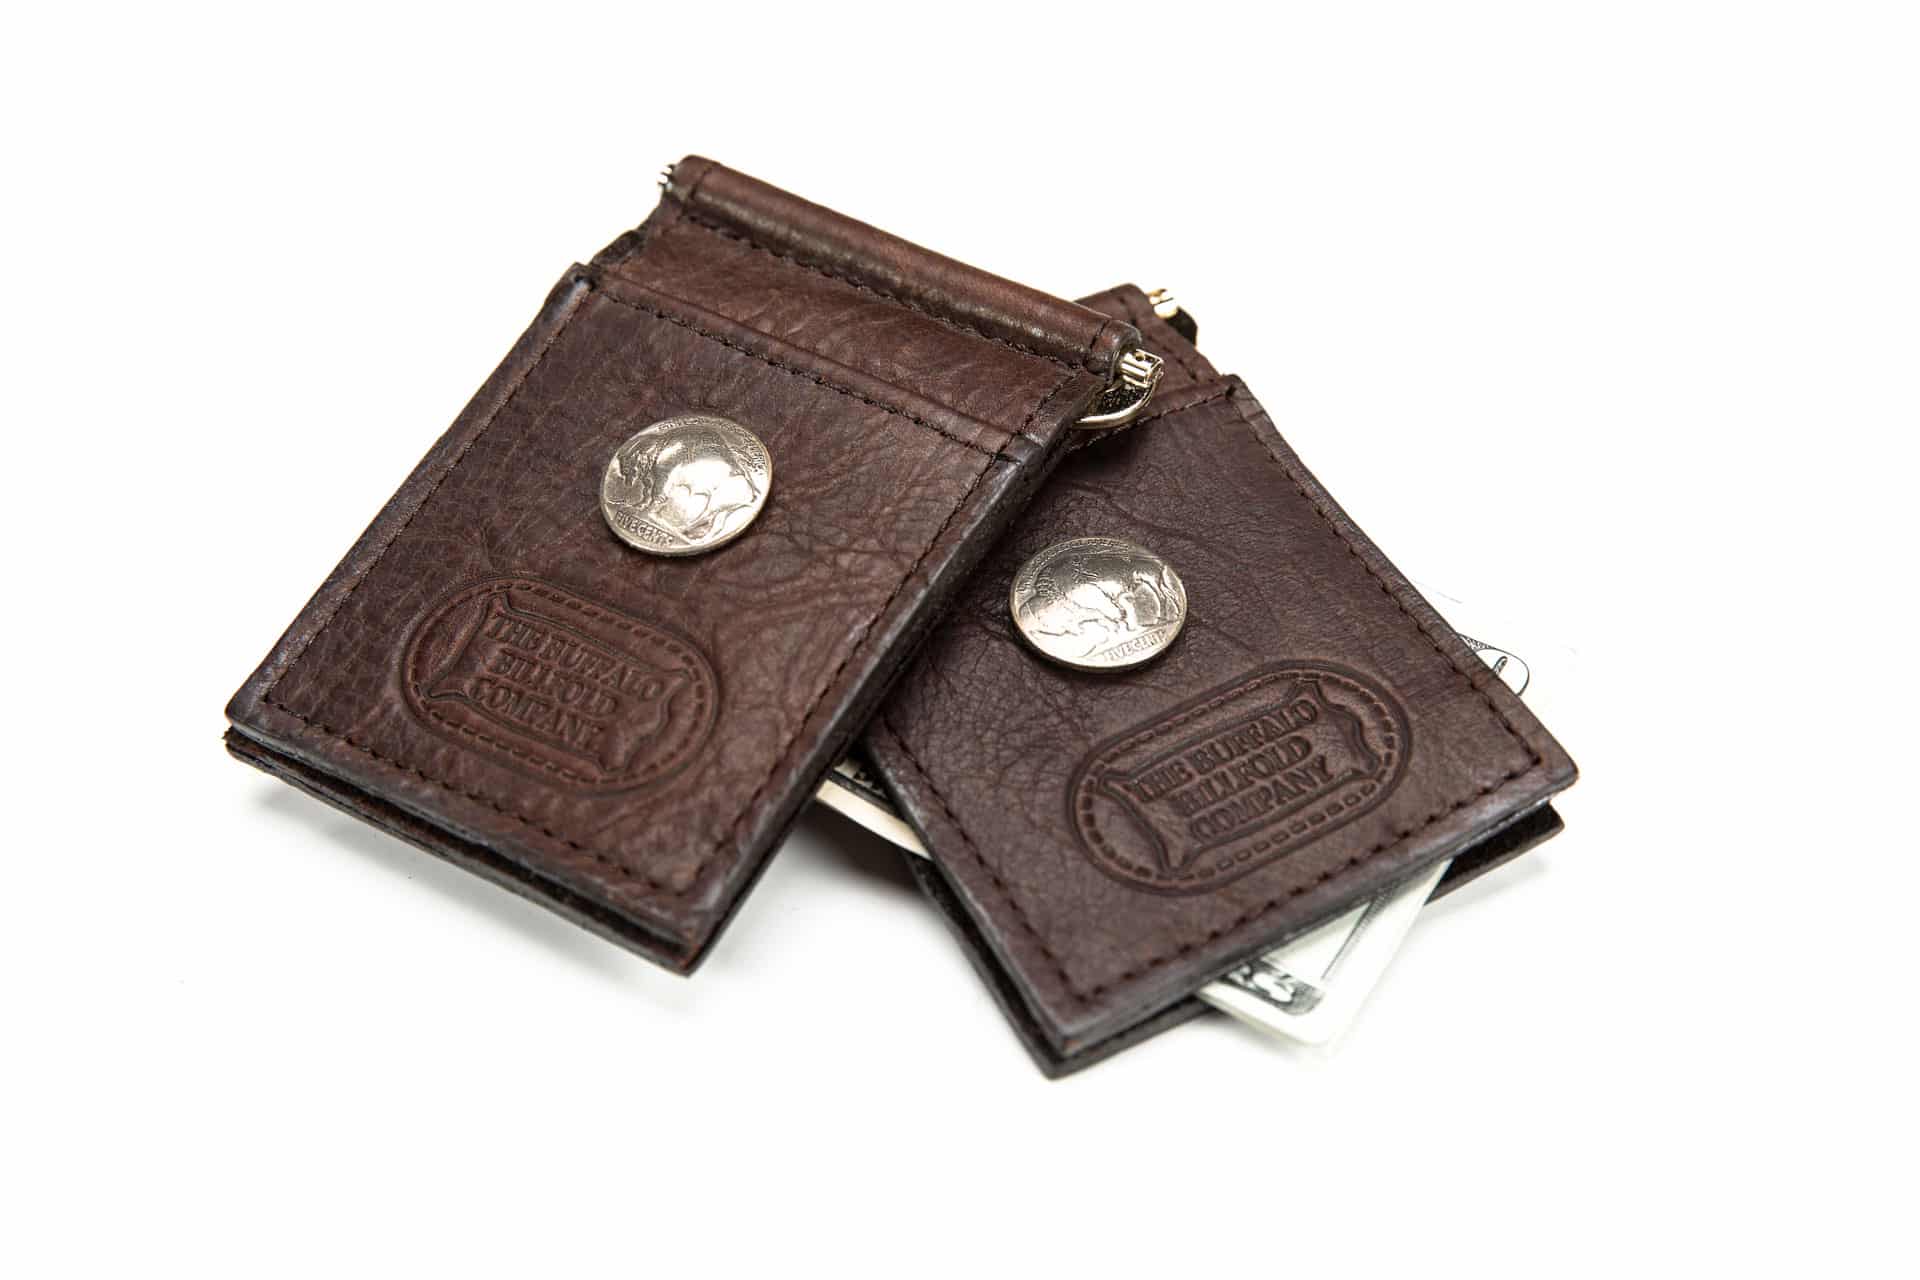 Bison Leather Wallet Made In Usa | Confederated Tribes of the Umatilla Indian Reservation